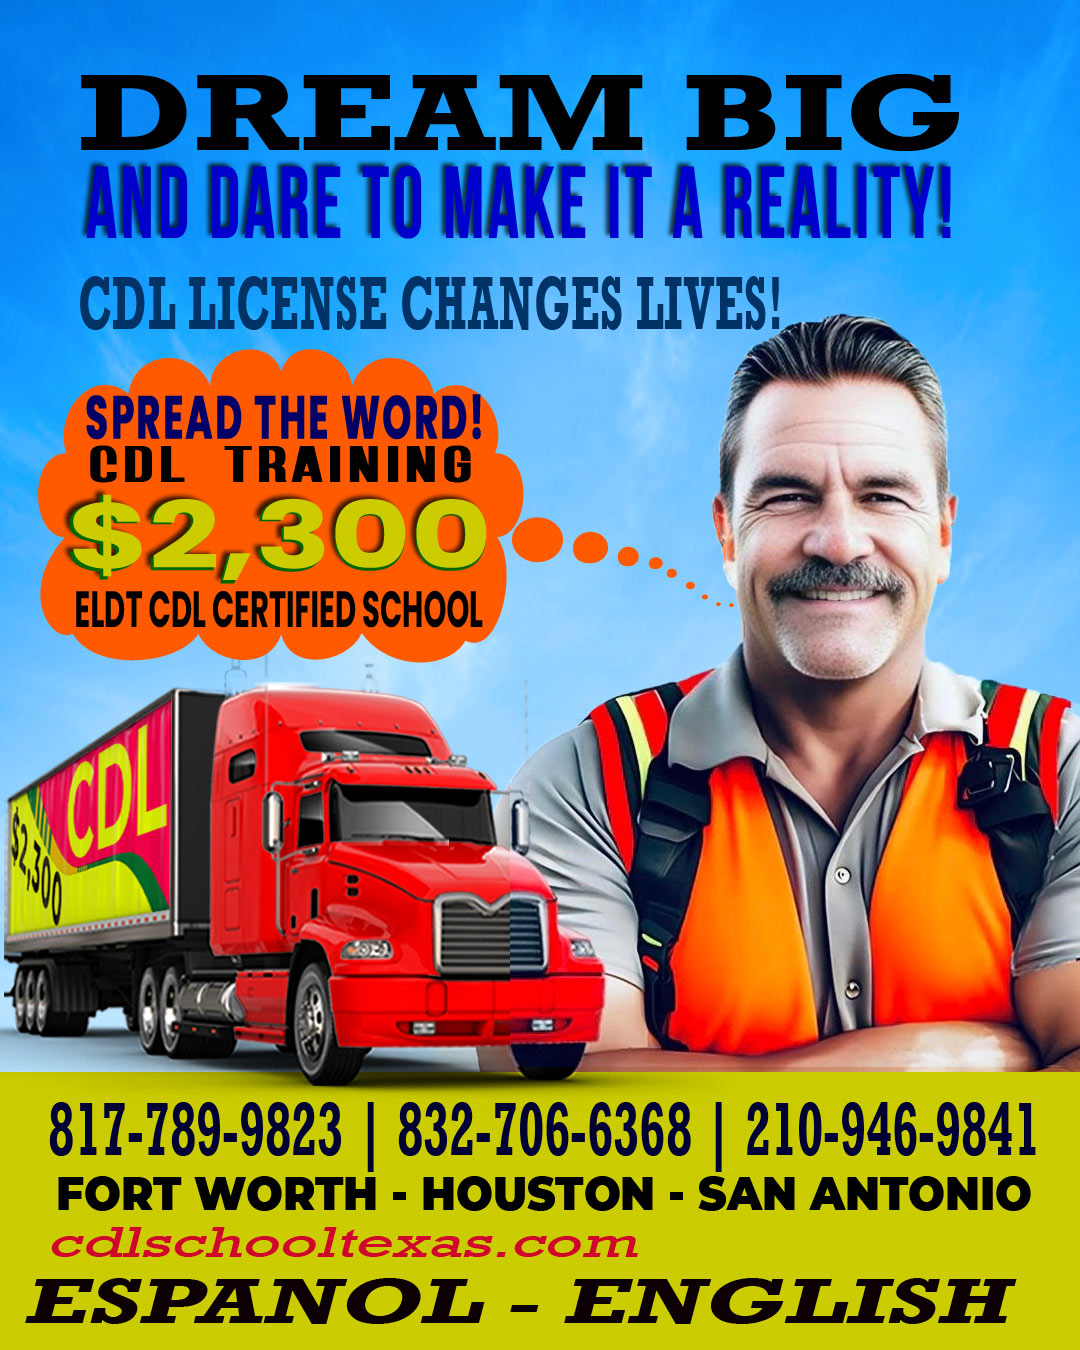 CDL Training Boerne TX the image show services